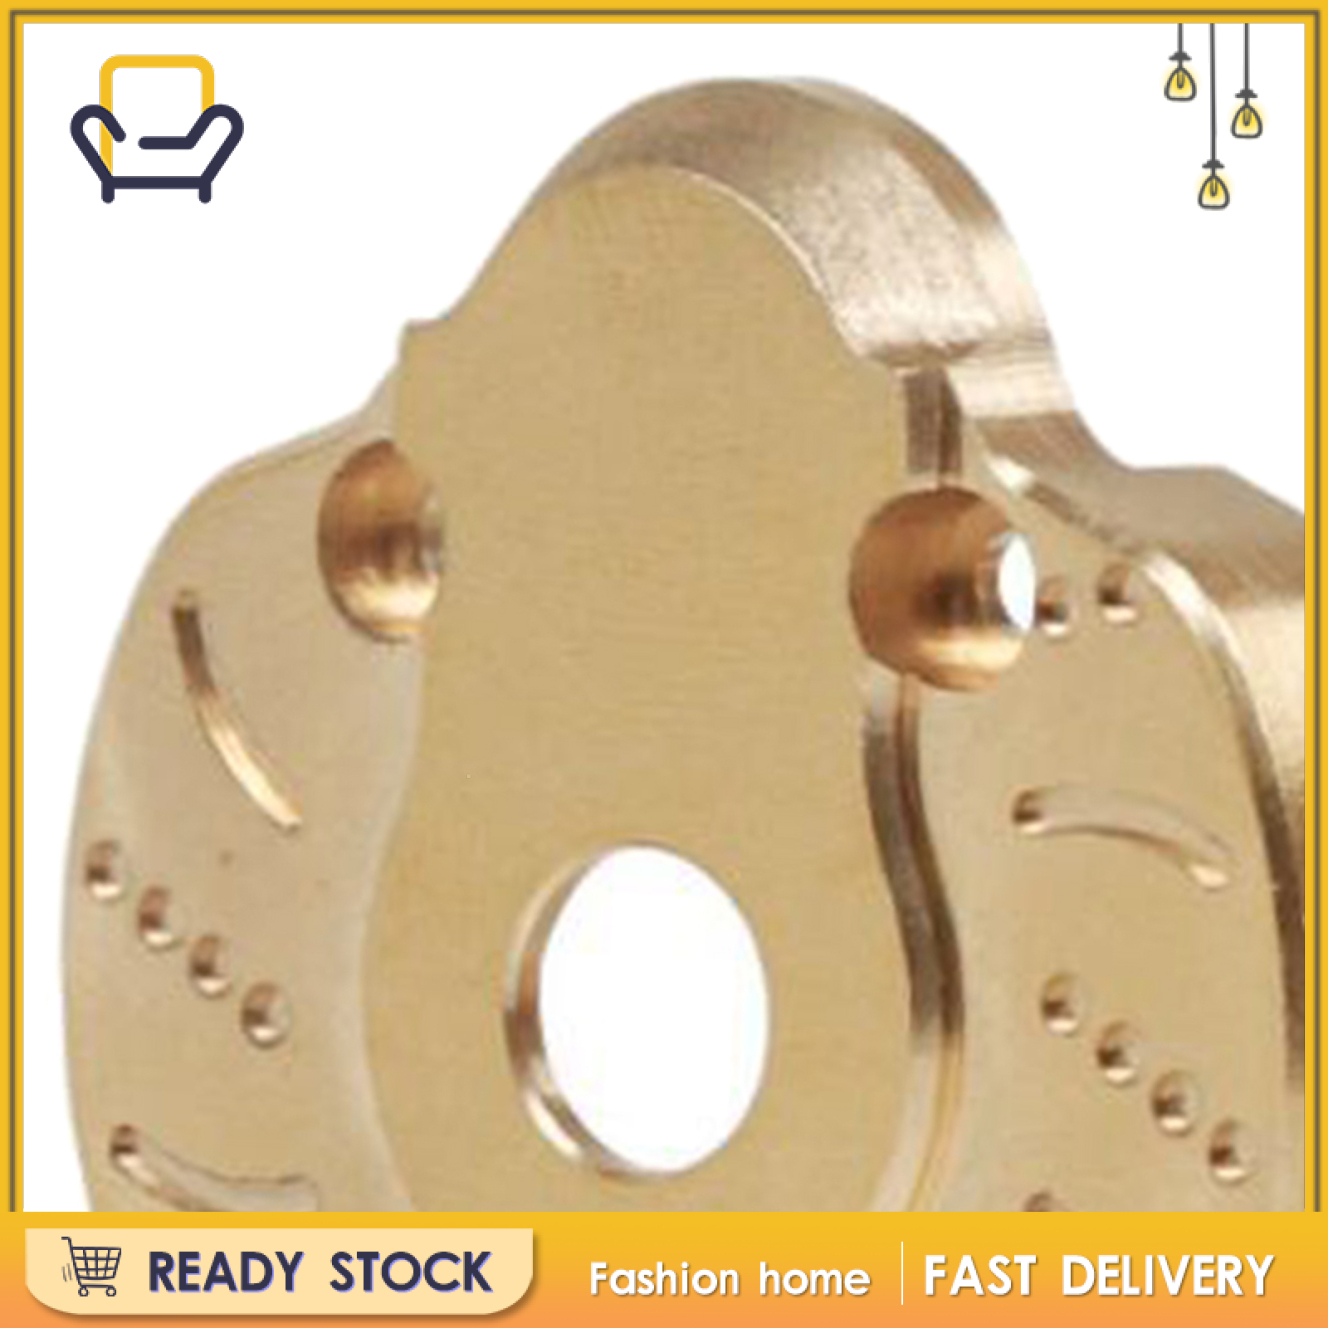 【Fashion home】Brass Steering Knuckle Cap for Axial Capra UTB SCX10 III AXI03007 Style 1